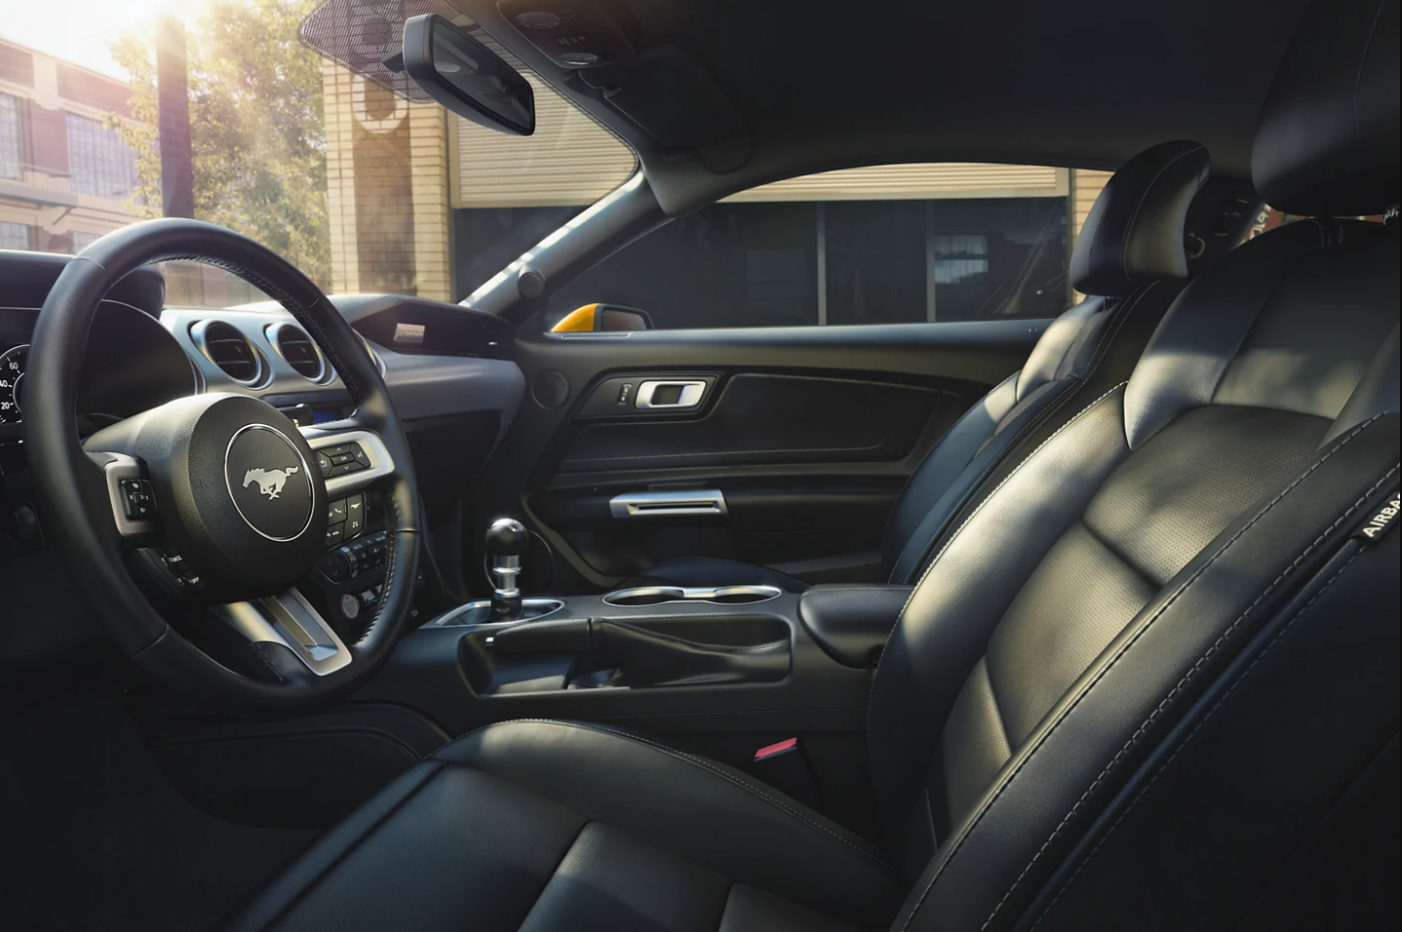 A view of the black leather upholstered interior of a 2022 Ford Mustang from the driver's side showing the seats and Mustang logo on the steering wheel.